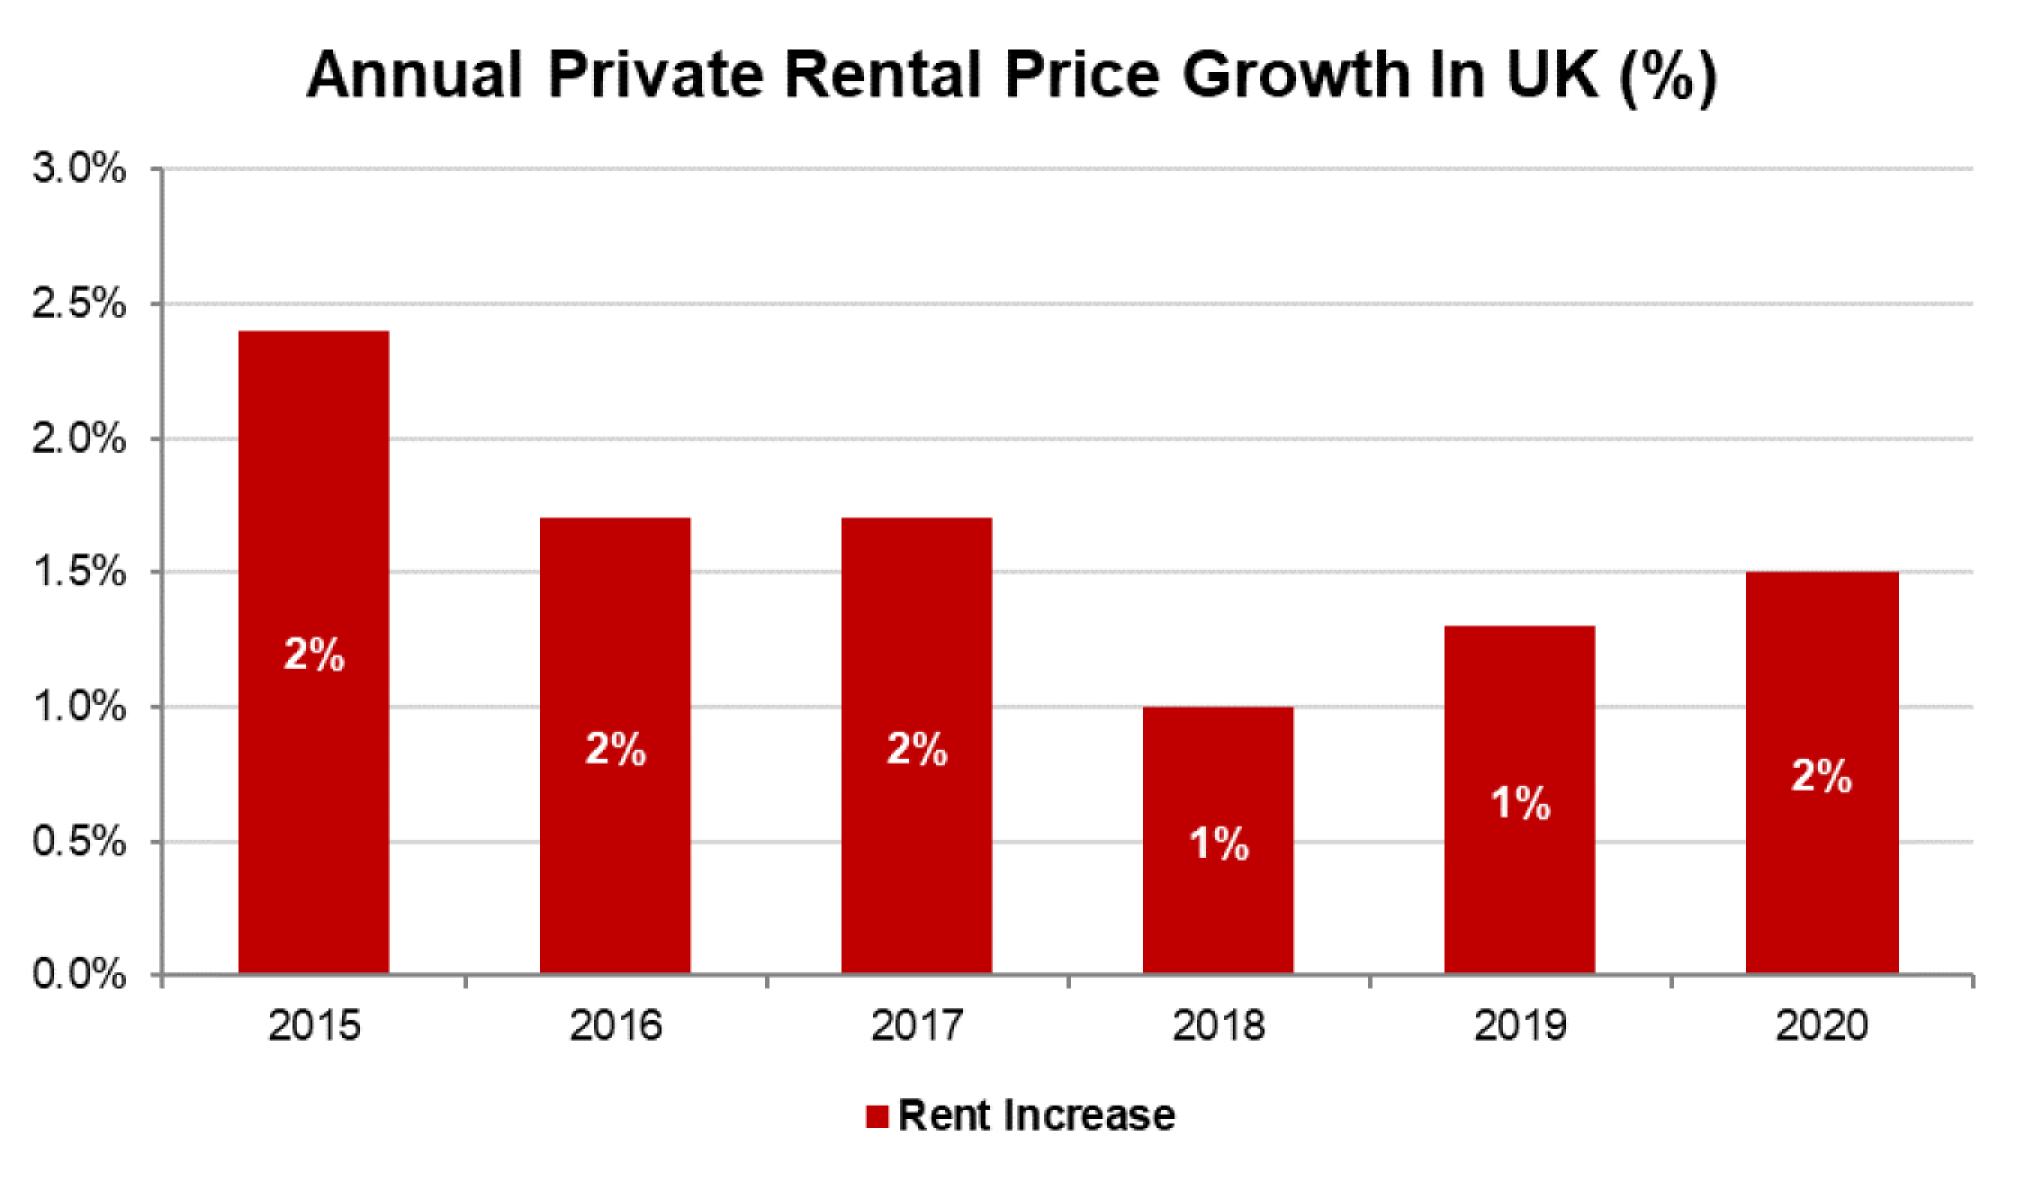 A red bar chart showing the average rent increase in the UK from 2015 to 2020.